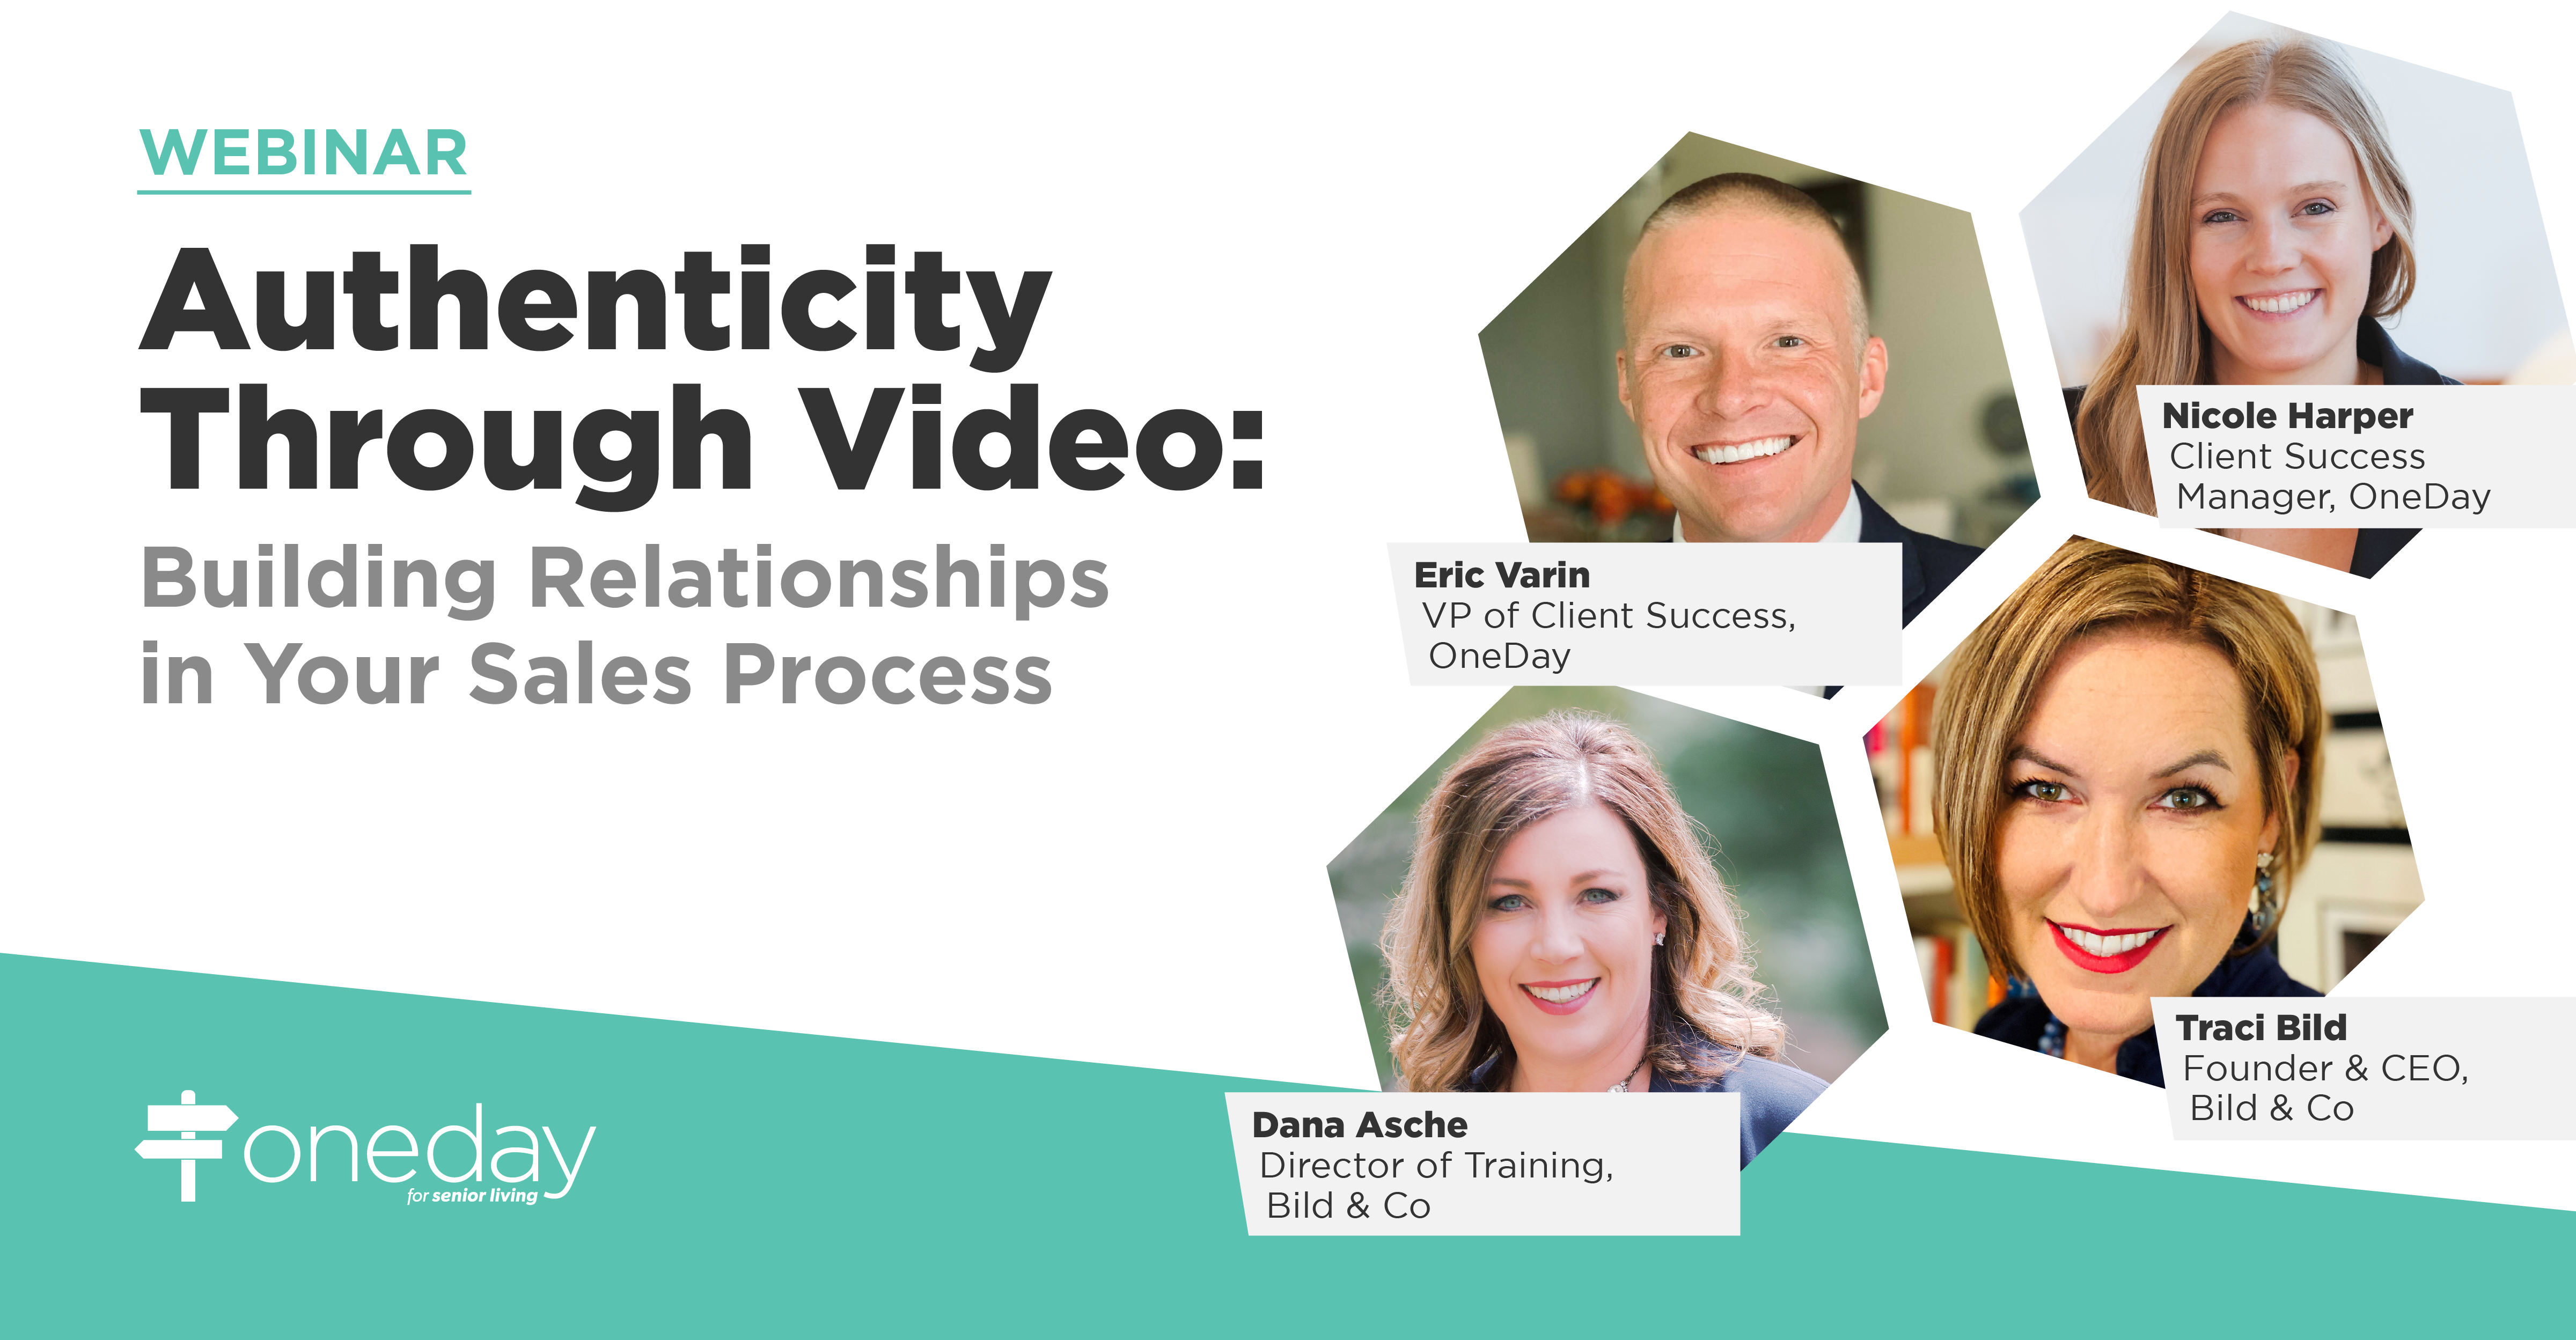 OneDay’s latest webinar is a roundtable discussion on simple ways your senior living sales and marketing team can use video to build prospect relationships.